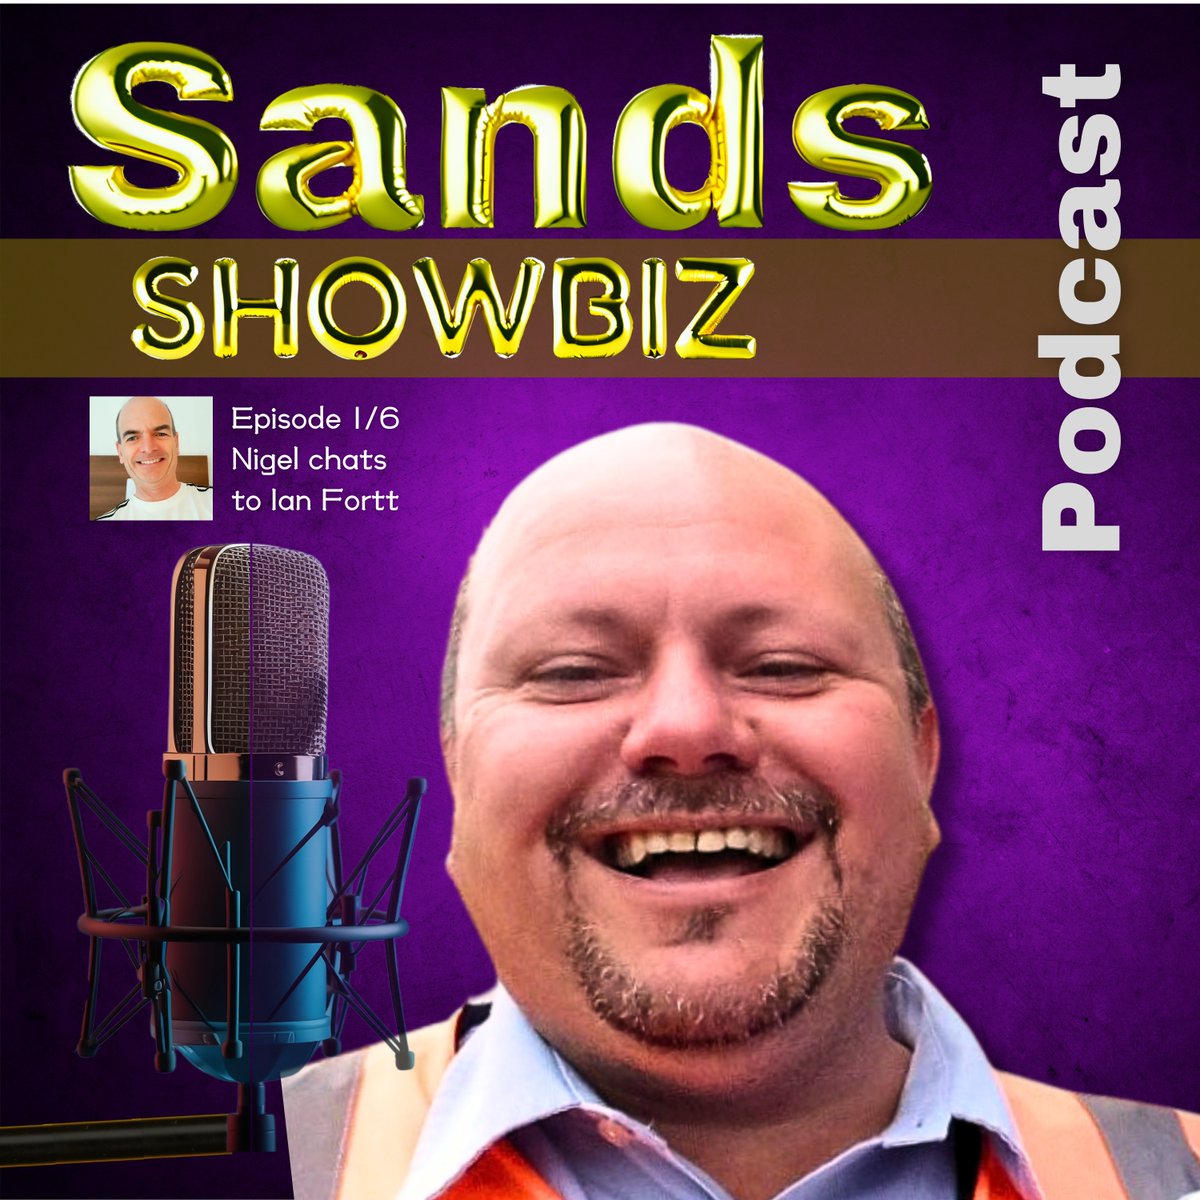 Chatting to Ian Fortt on the Showbiz Podcast - Full 30min interview available now. Inside the world of a TV extra - You can listen on Buzzsprout: buzzsprout.com/2319263/147235…